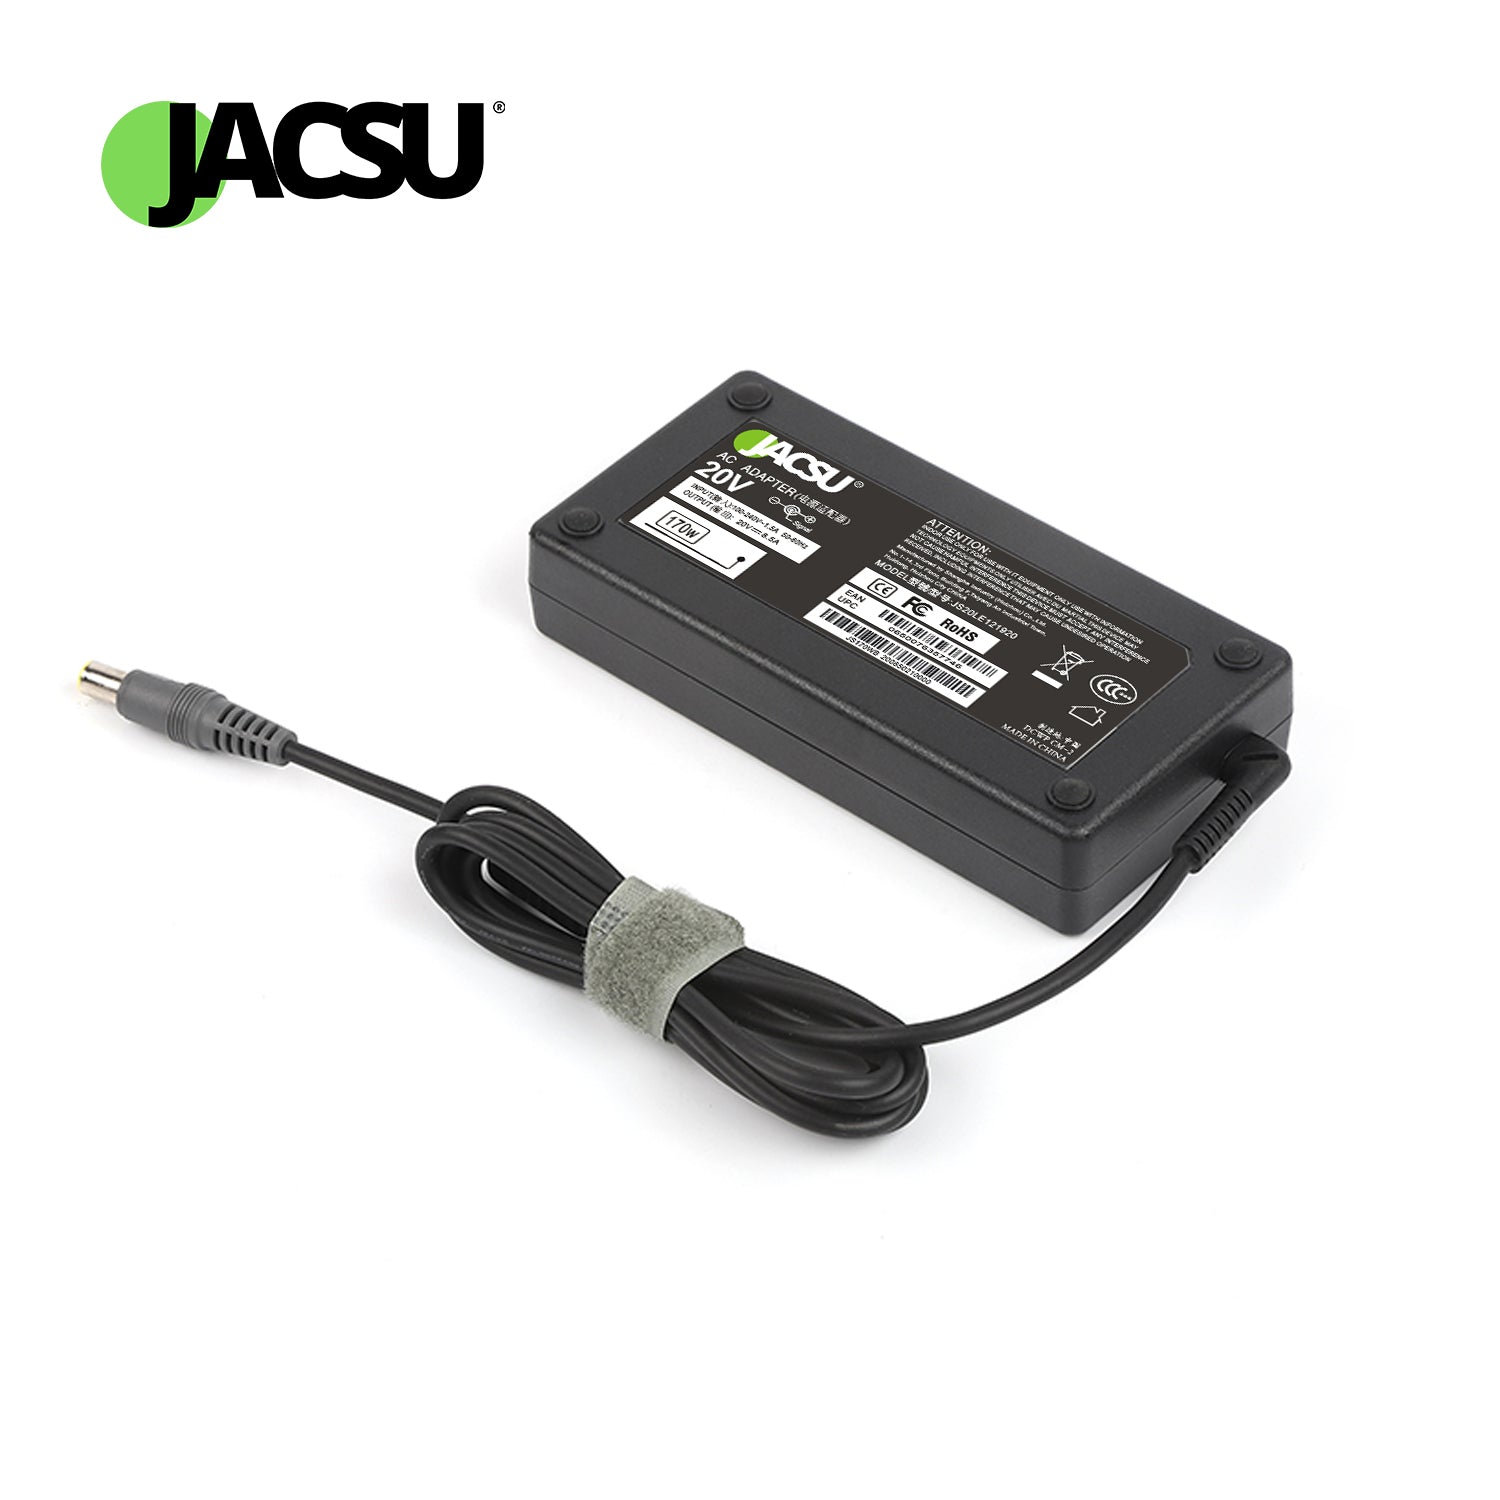 Jacsu 20V 8.5A 170W 7.9*5.5mm Laptop Adapter Charger for Lenovo Legion Y720-15 Y7000P P50 P51 P70 P71 W540 W541